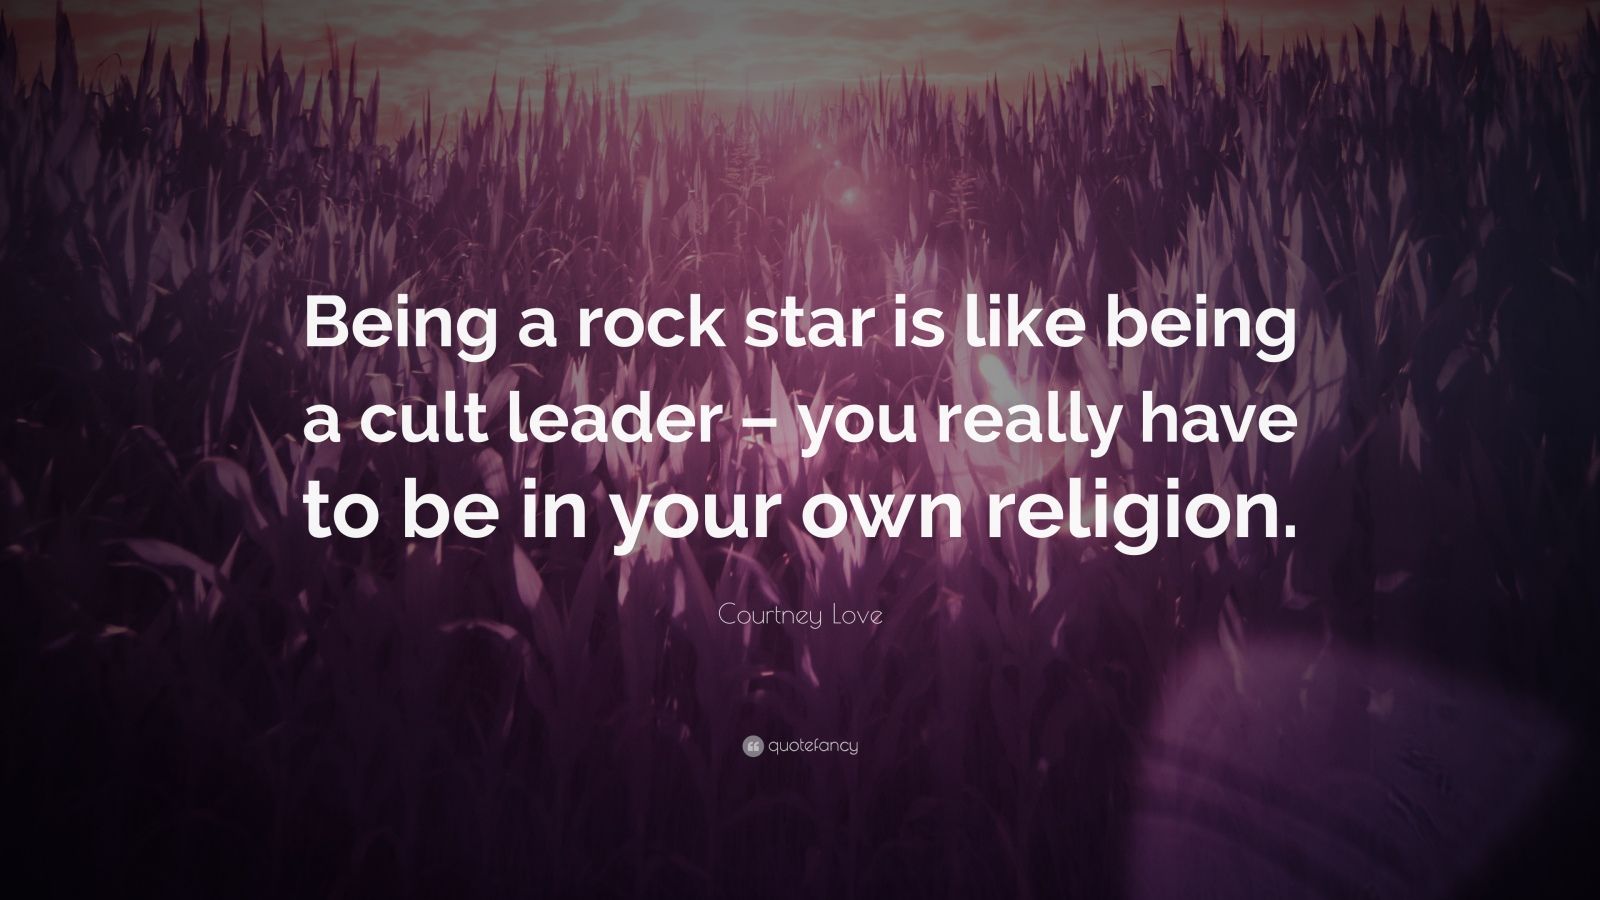 Courtney Love Quote “Being a rock star is like being a cult leader –